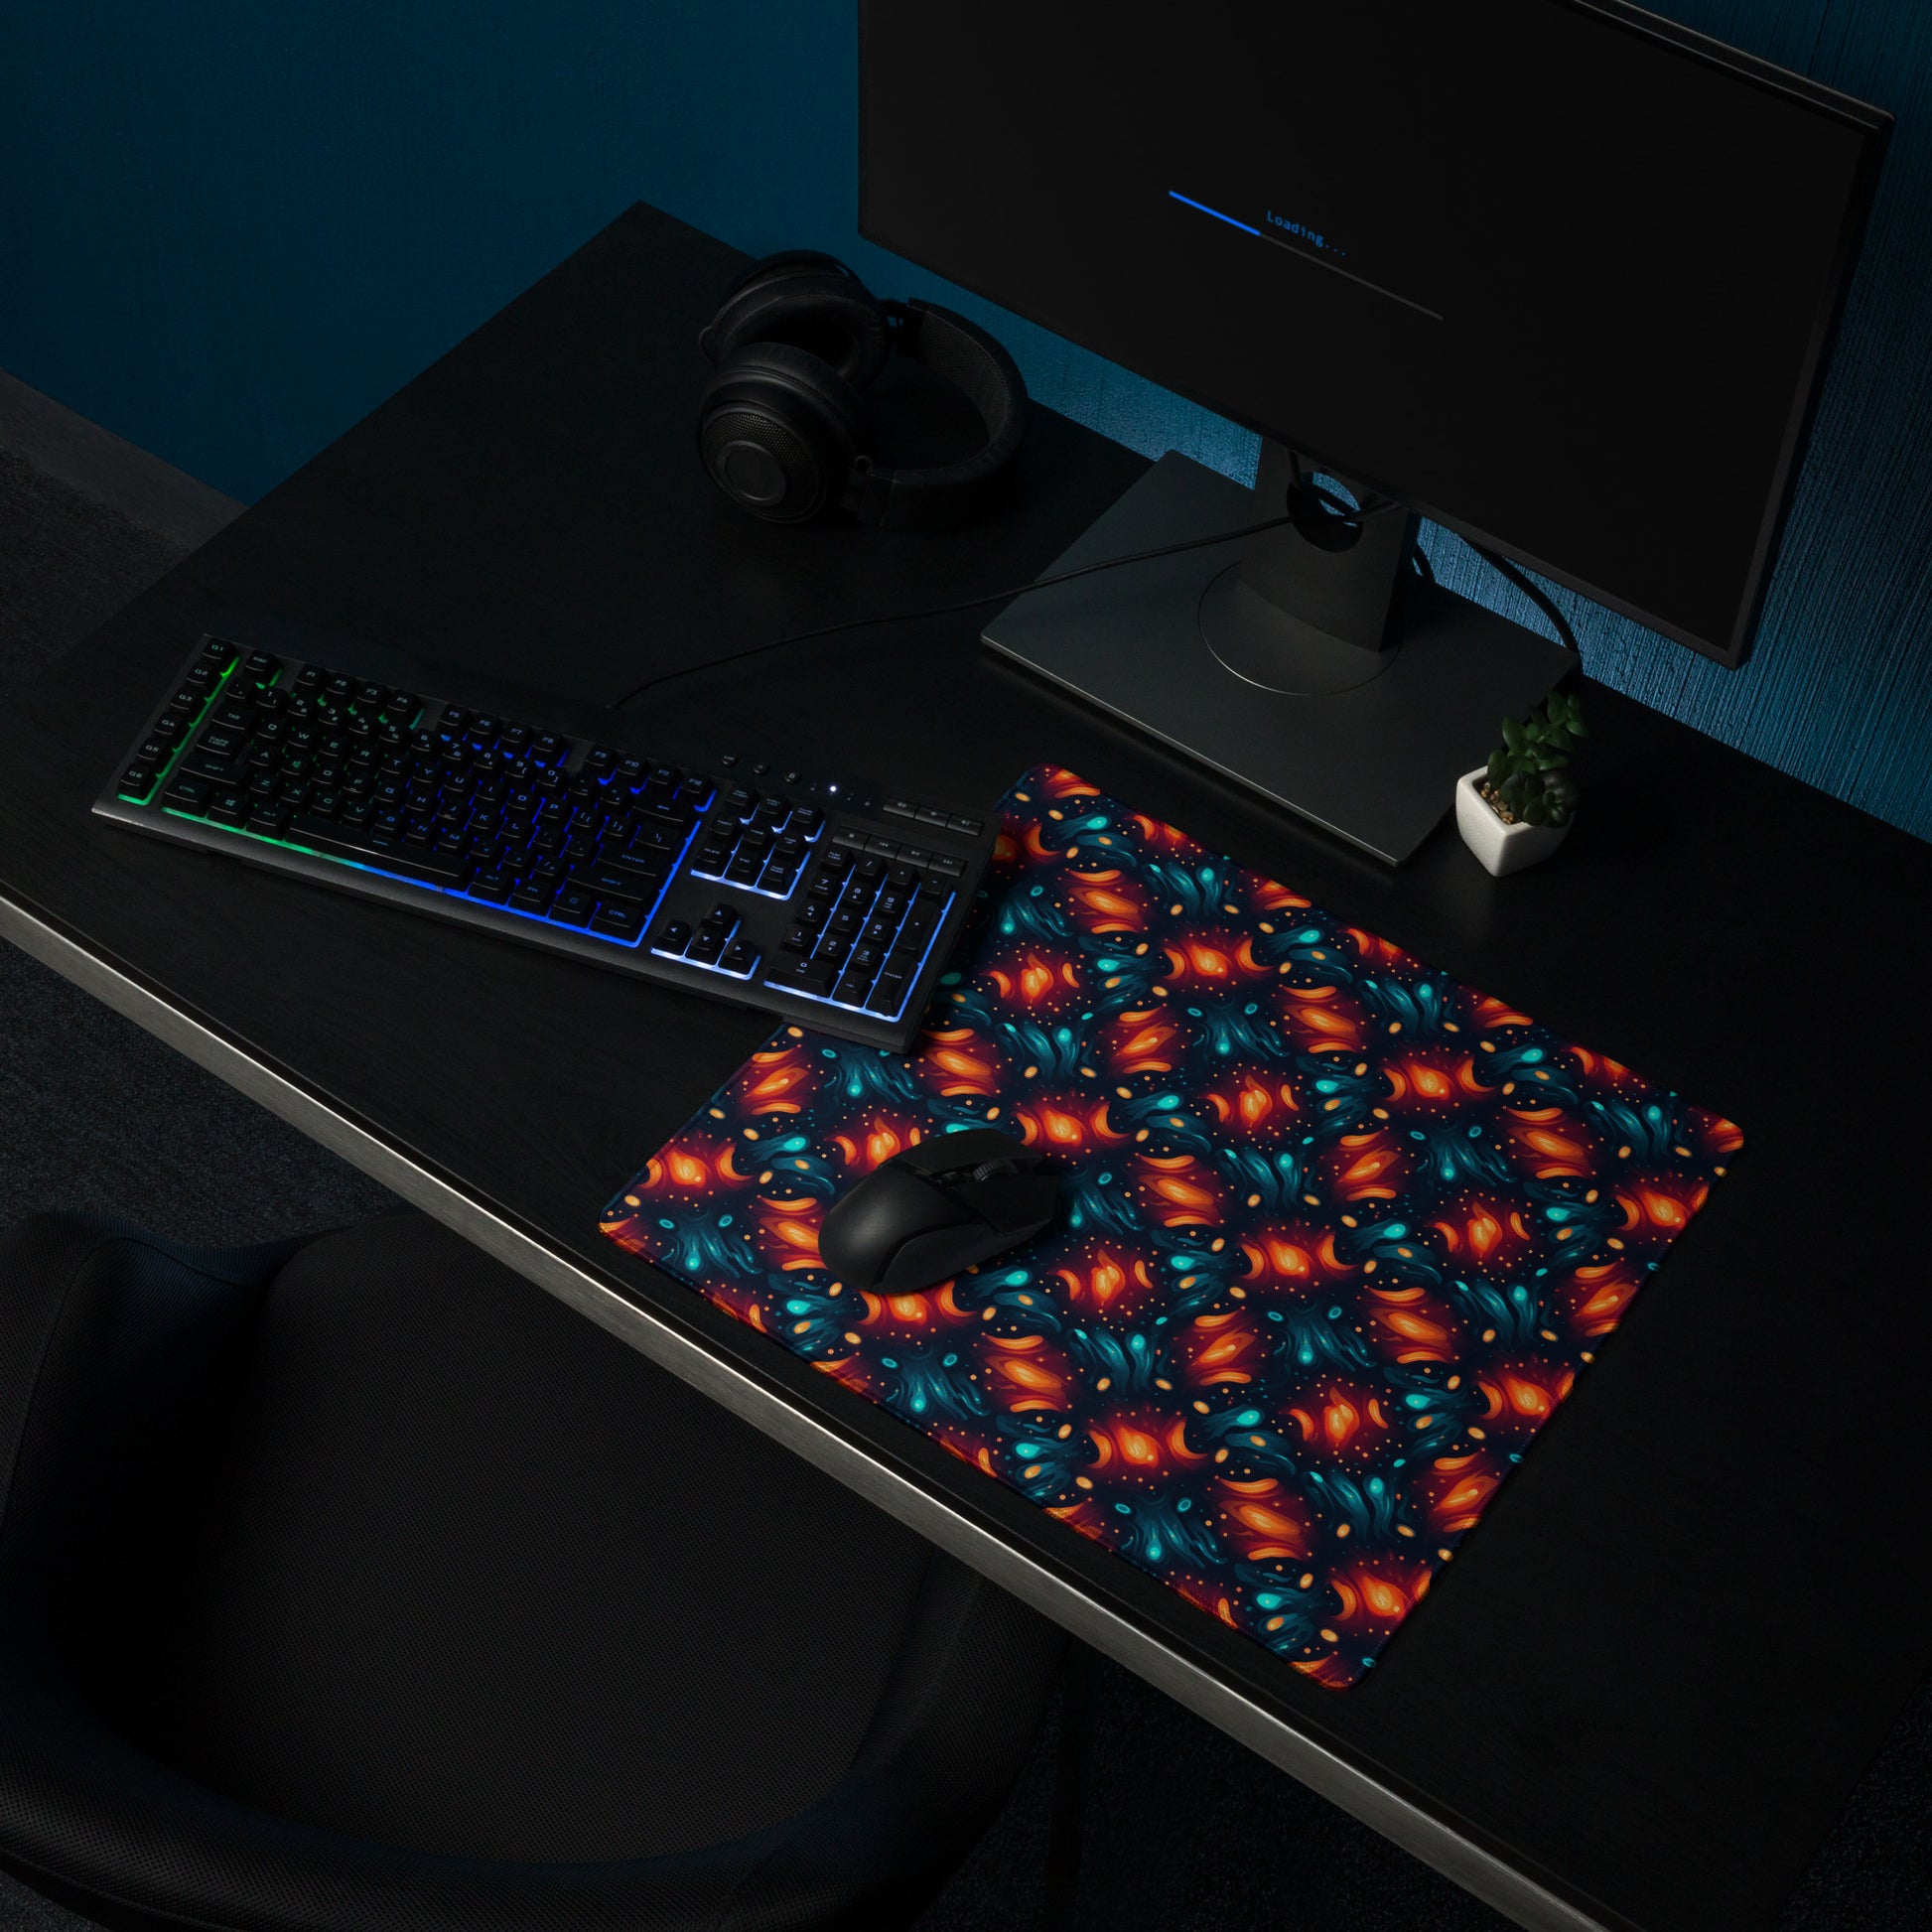 A 18" x 16" desk pad with a blue and orange abstract cross hatch pattern sitting on a desk.